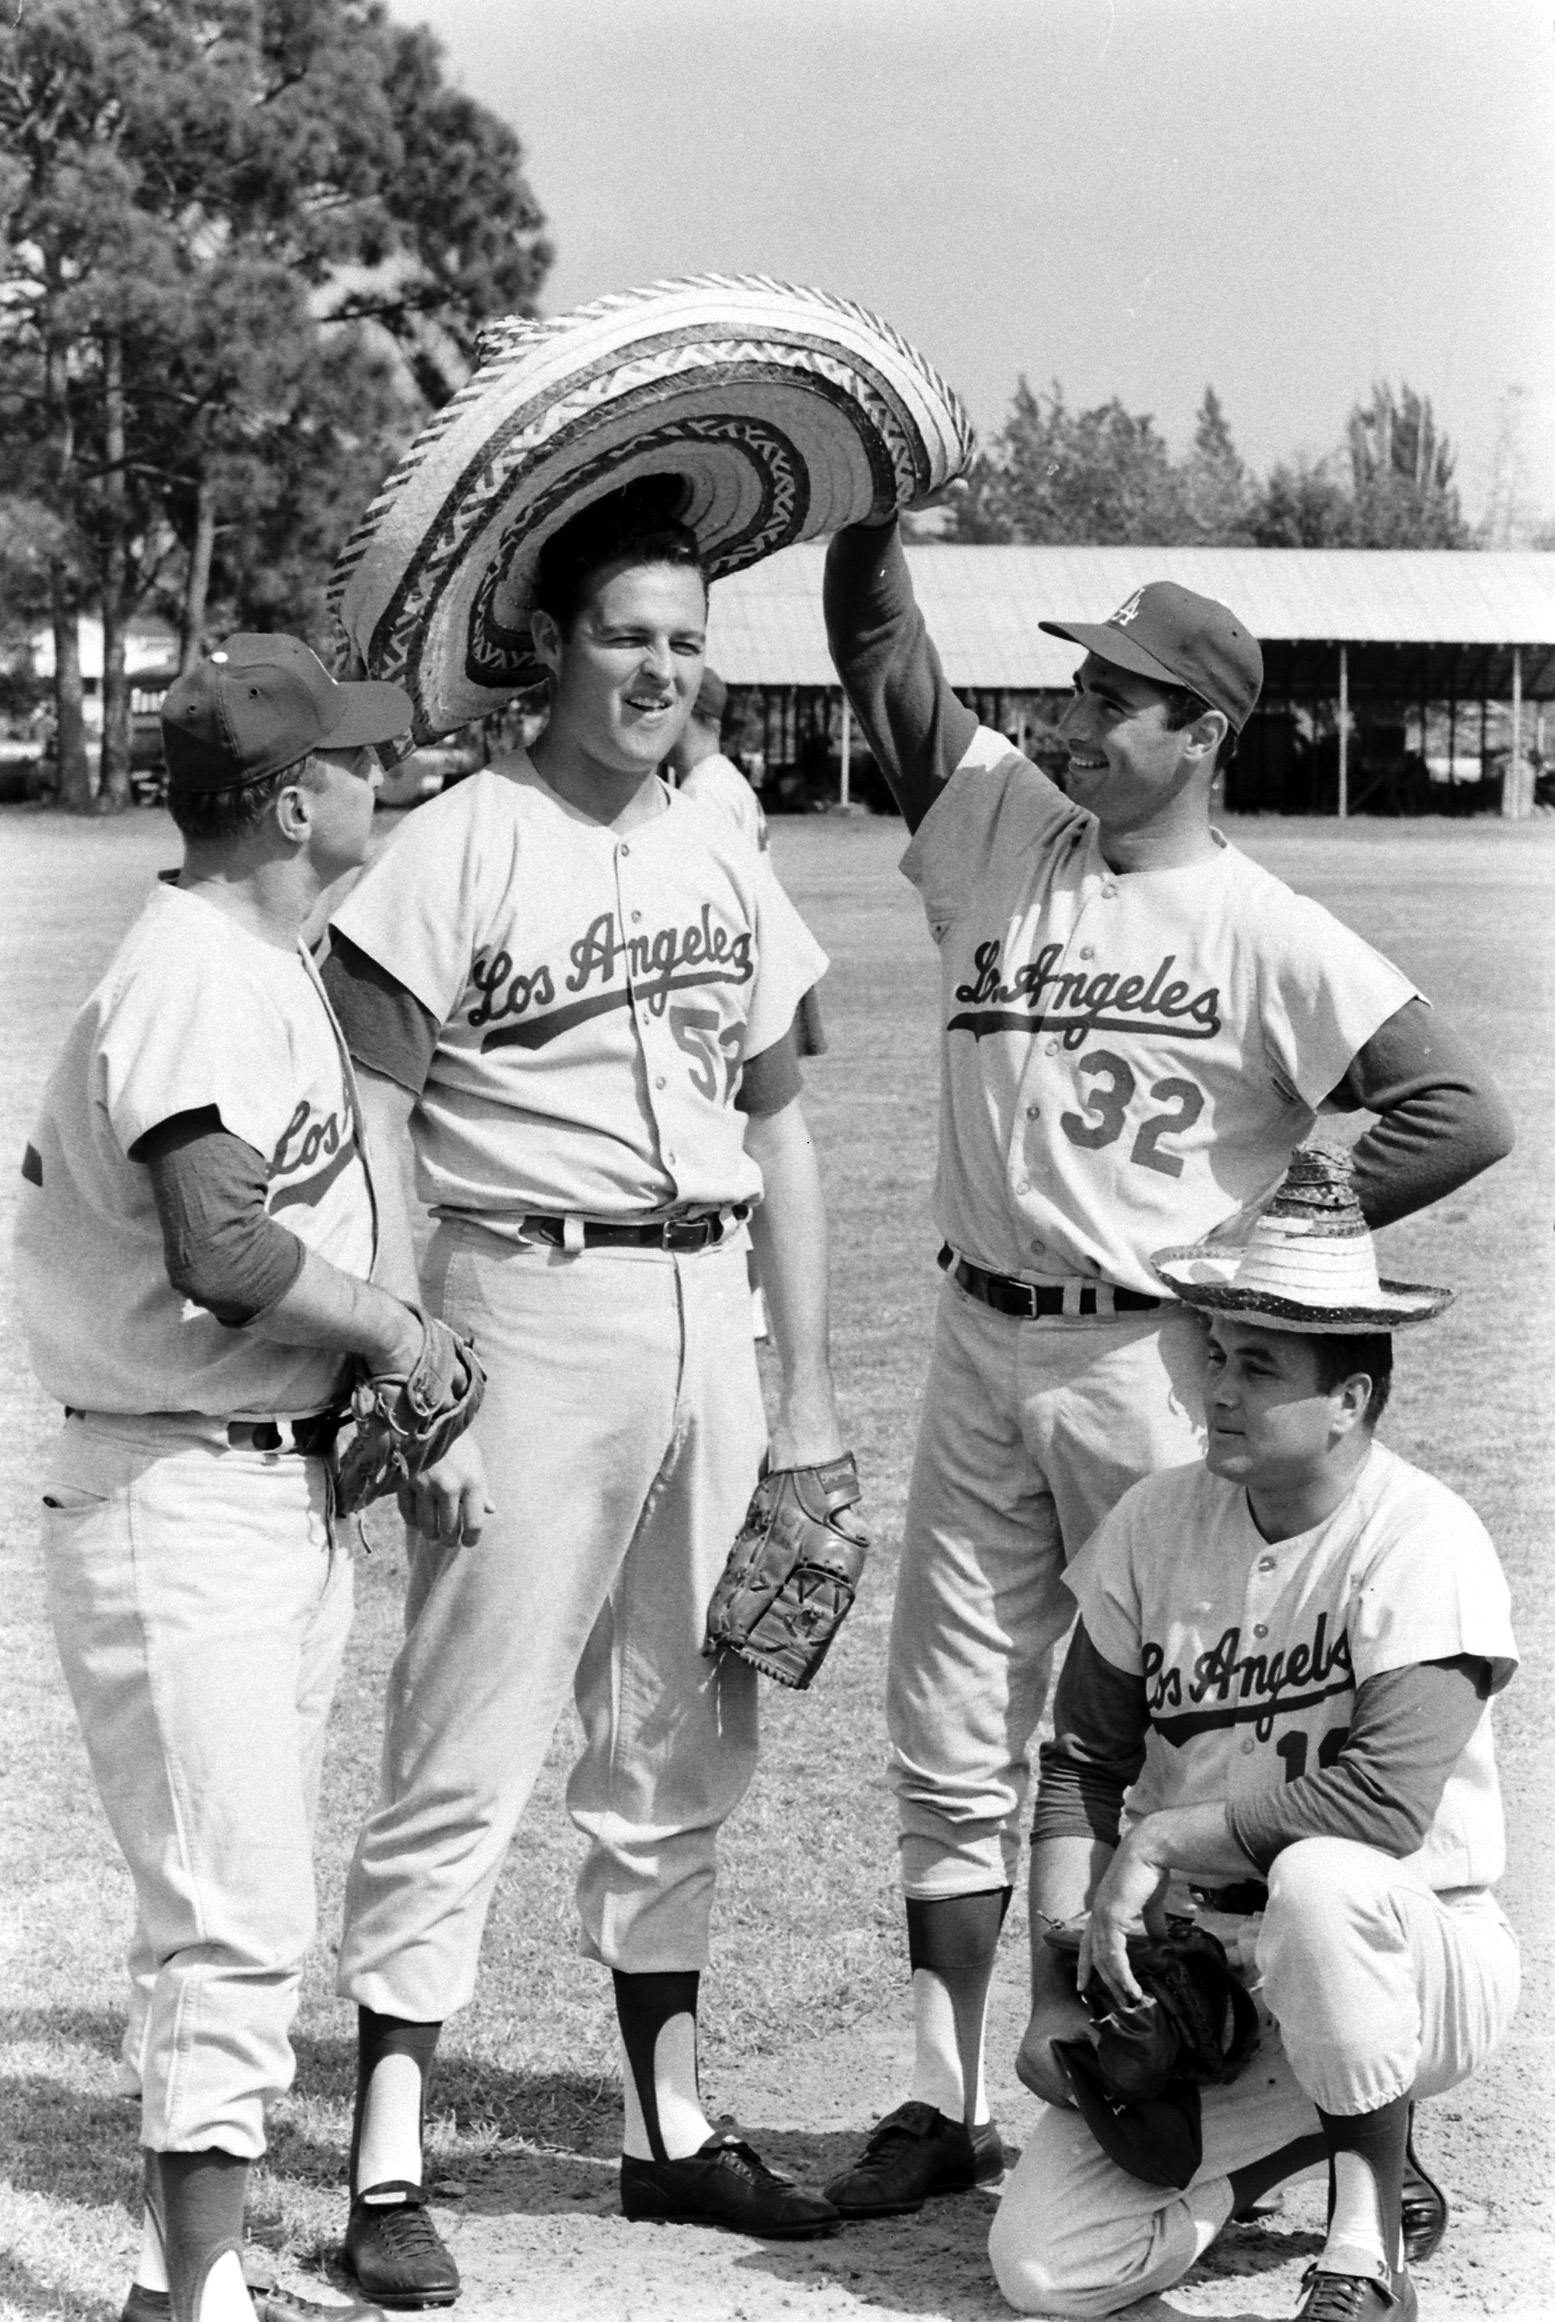 Sandy Koufax (number 32) clowning around with his teammates.